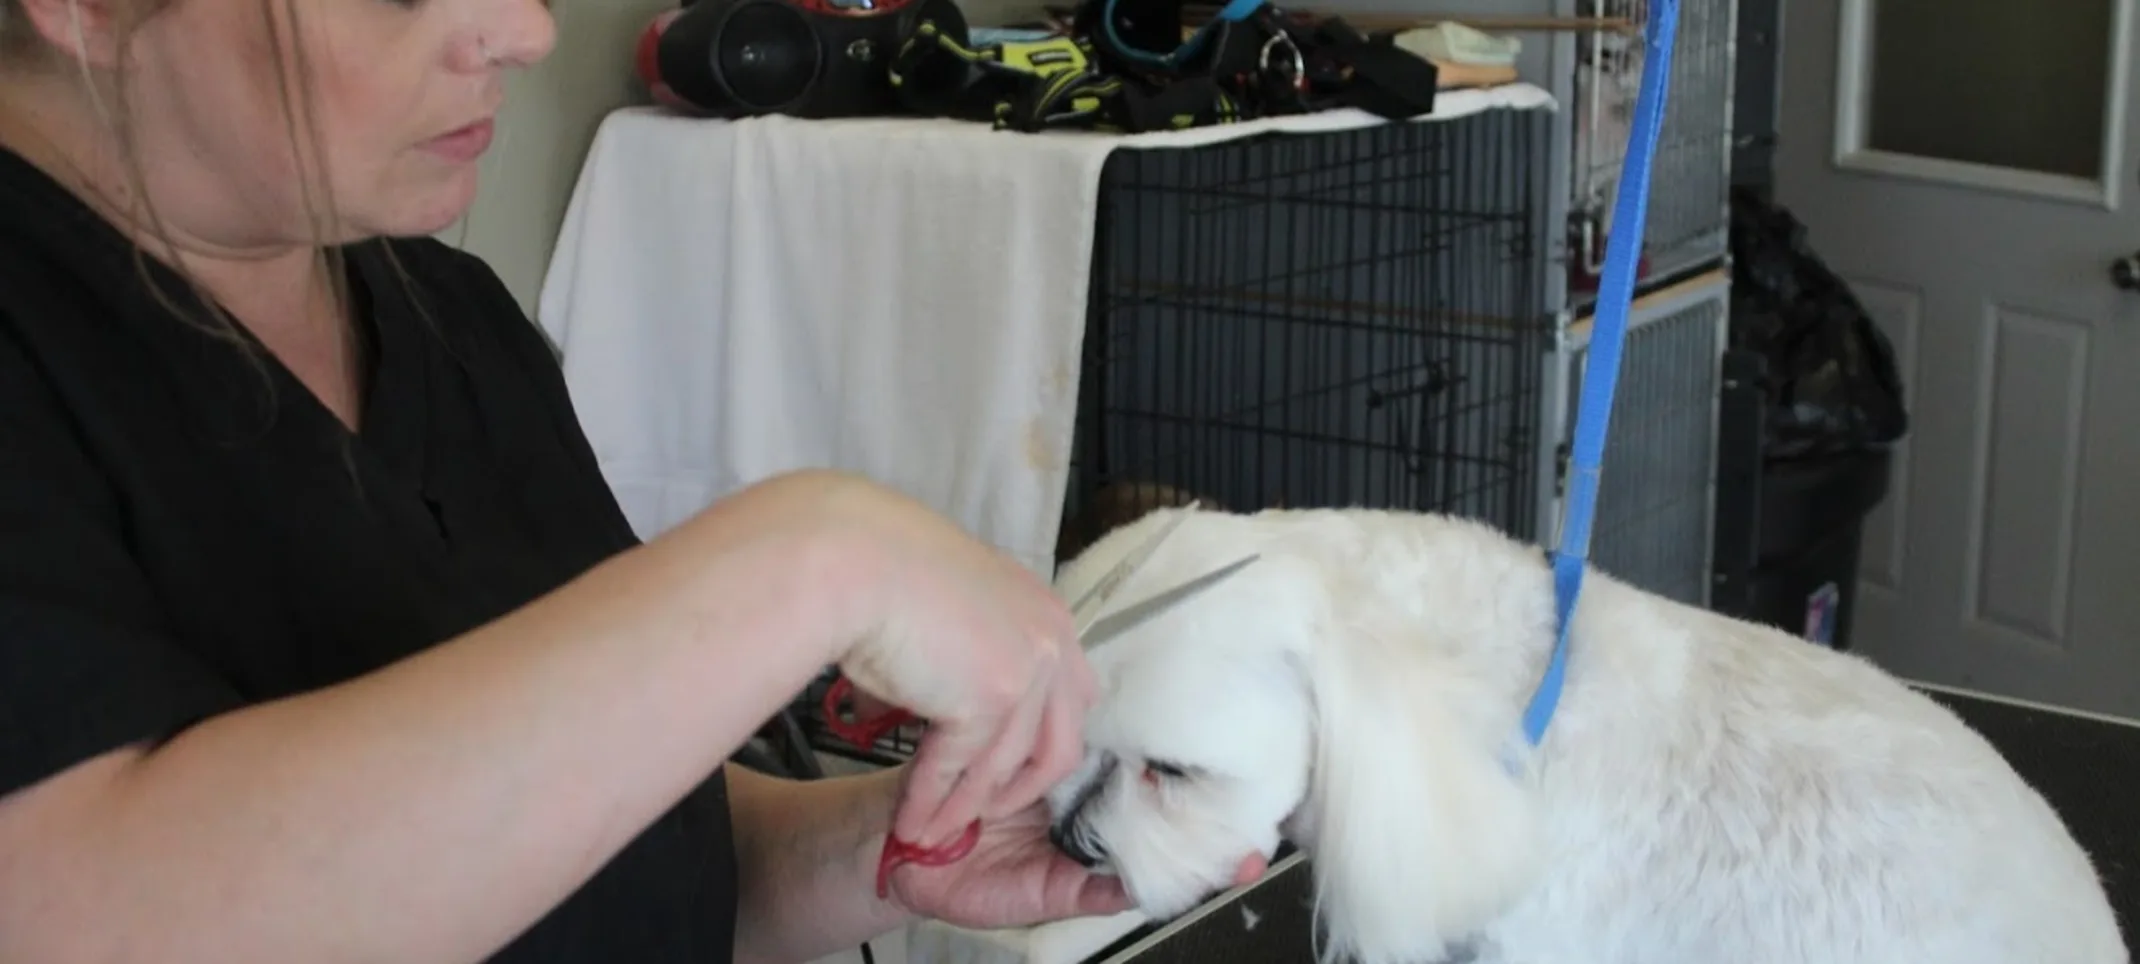 Head fur being trimmed to the proper length on a furry white dog